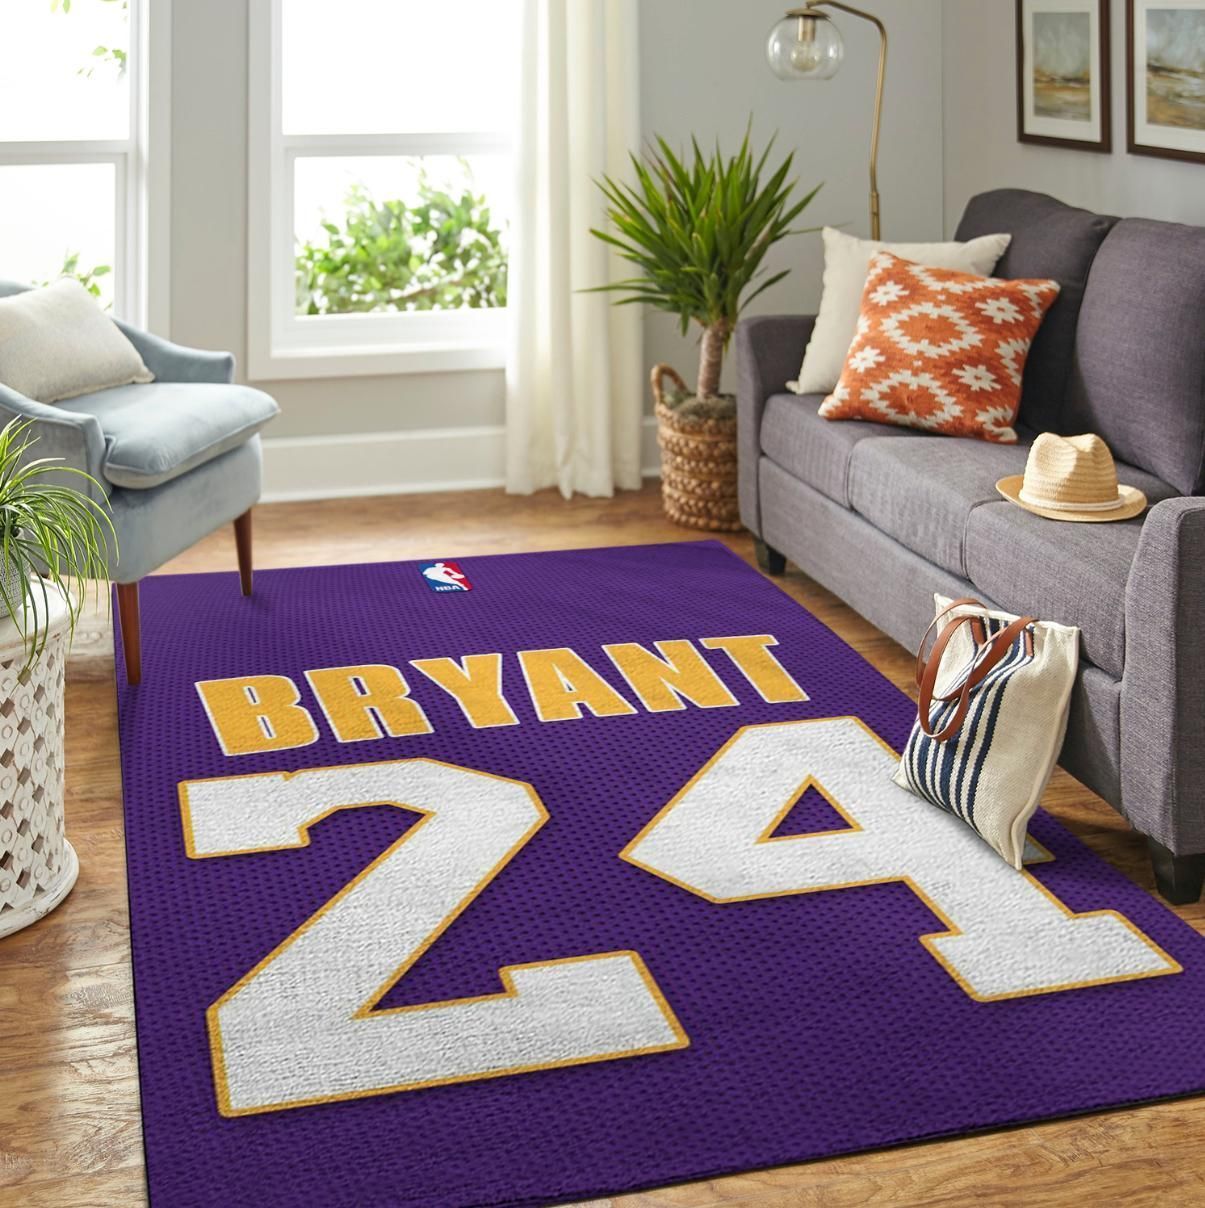 Kobe Bryant 24 Lakers Living Room Area Rug Rugs For Living Room Rug Home Decor - Indoor Outdoor Rugs